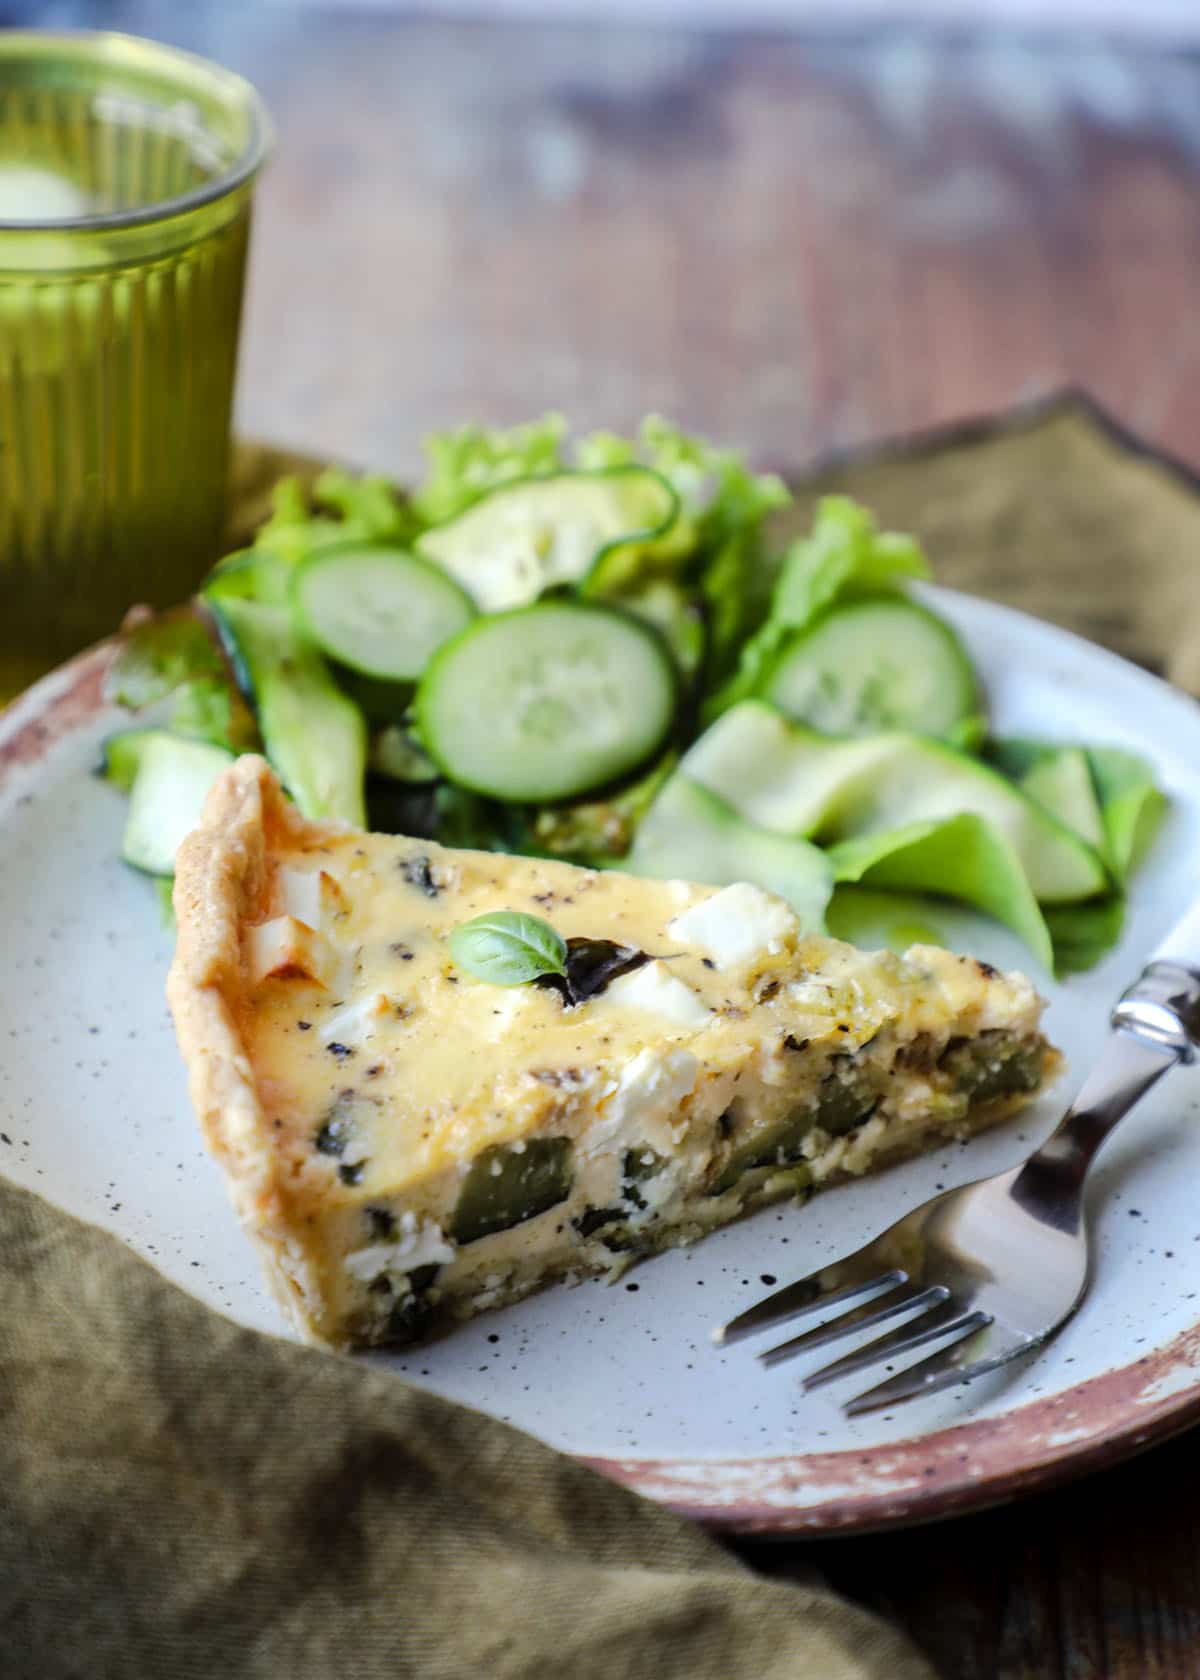 Courgette and Feta Tart on plate with salad